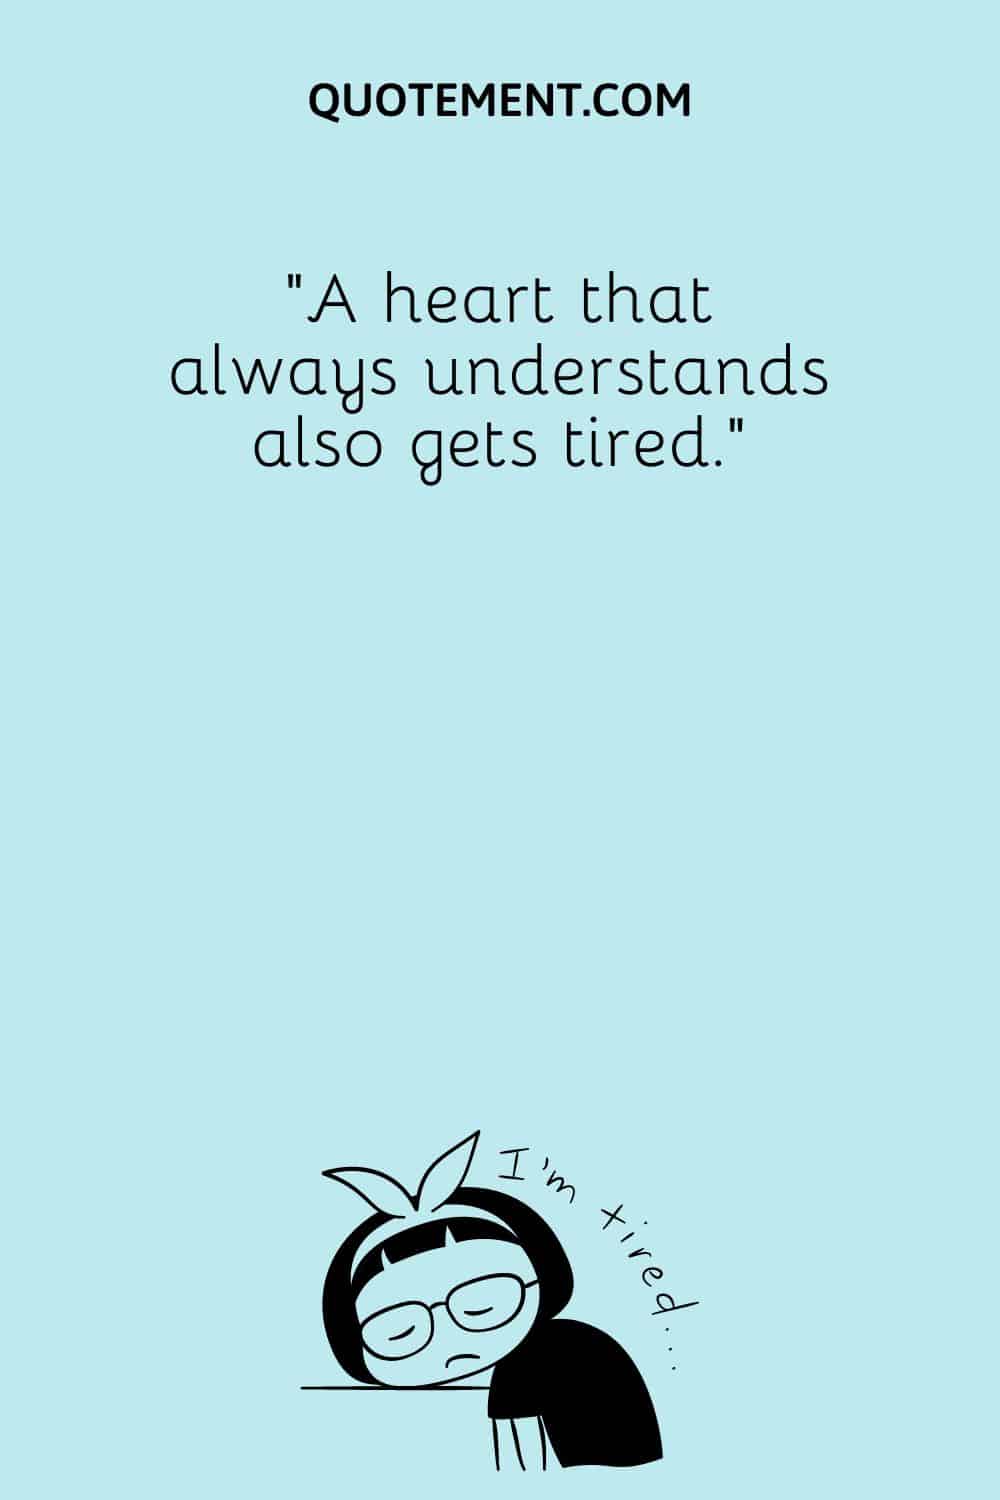 A heart that always understands also gets tired